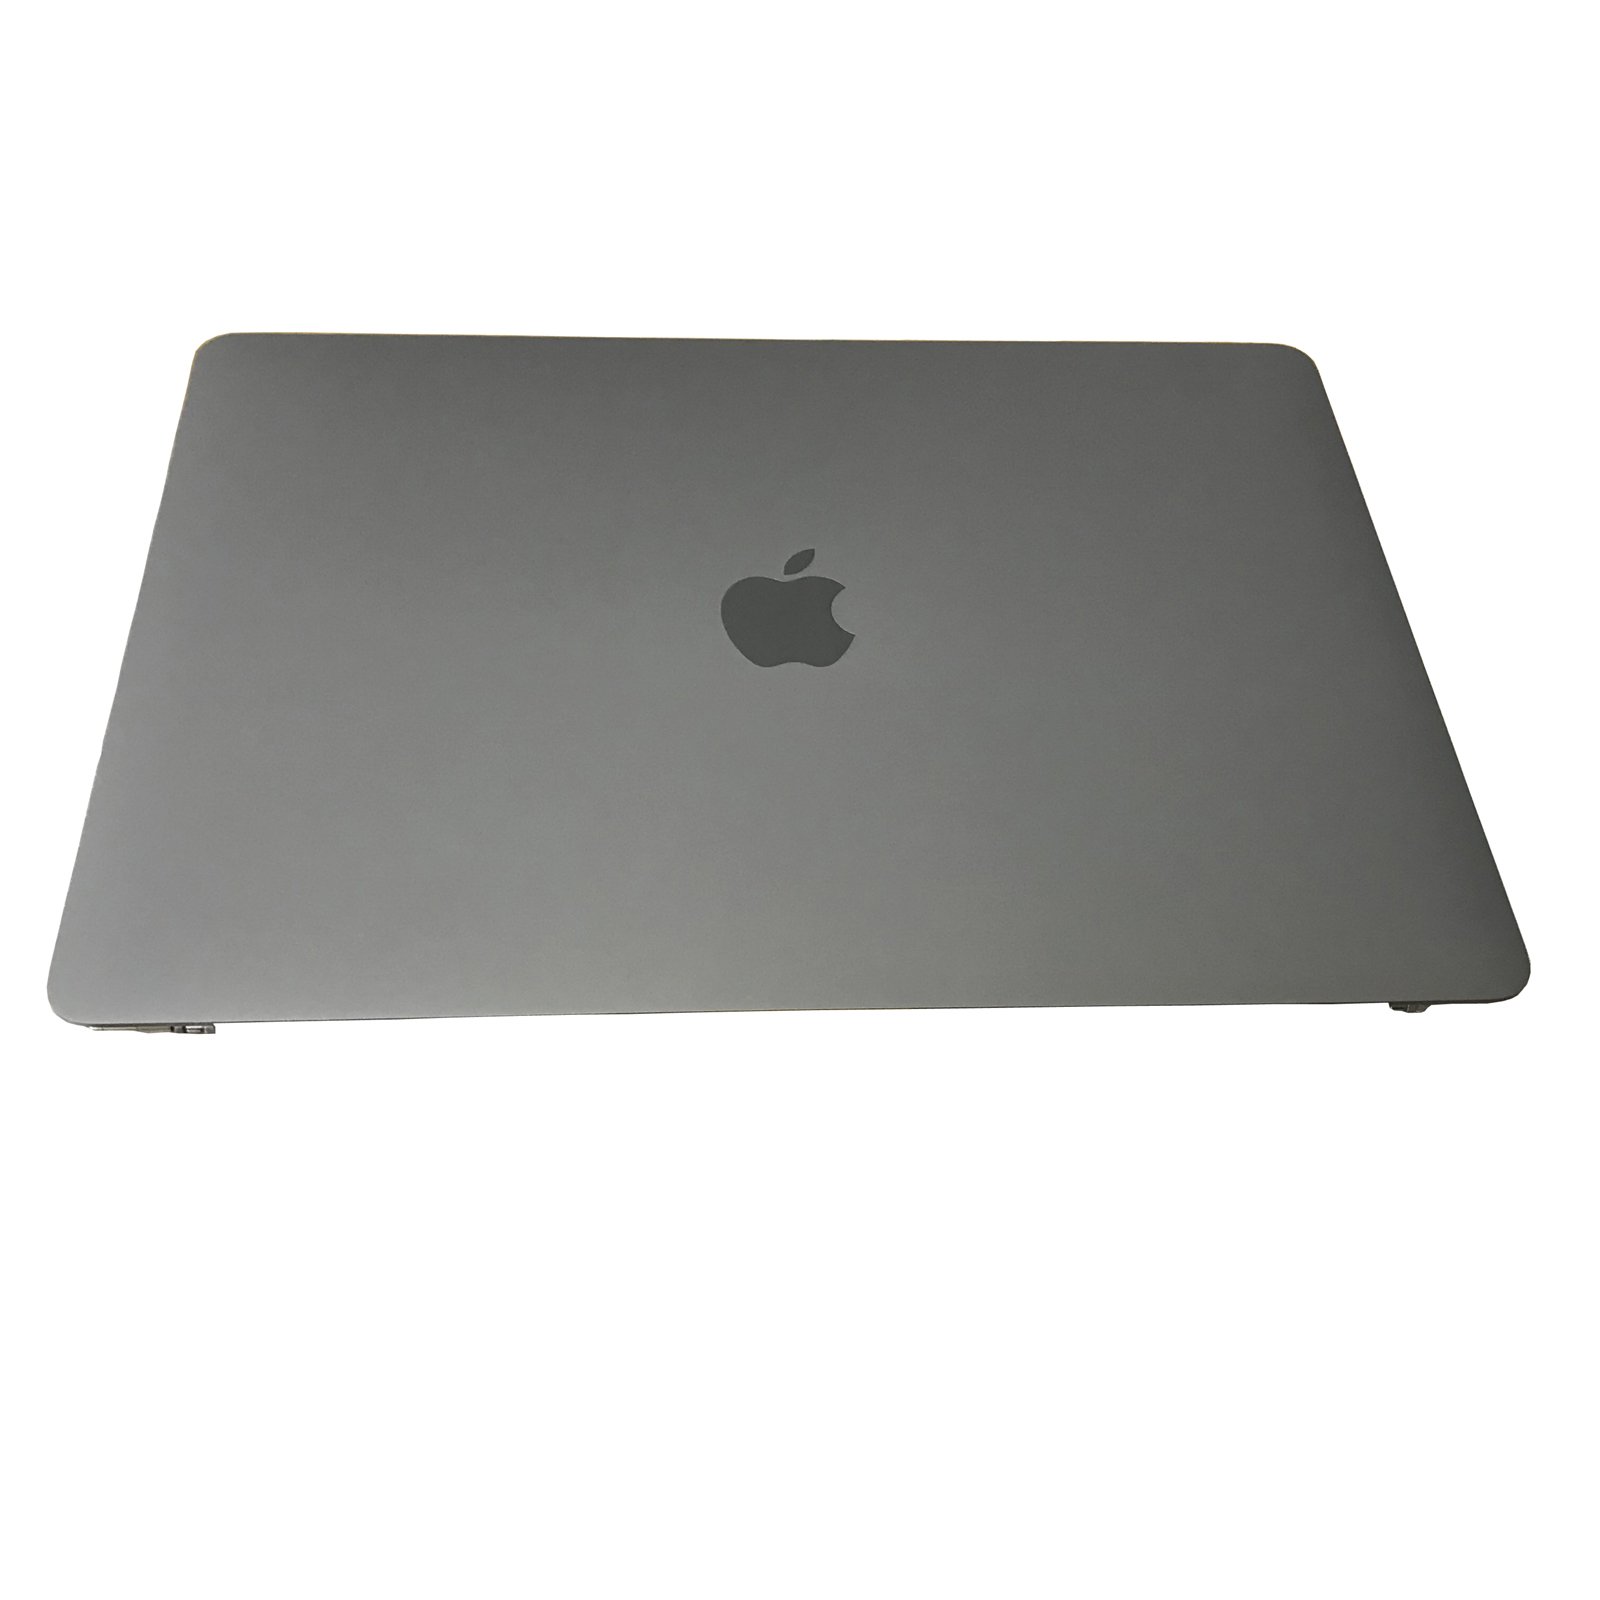 LCD Screen Replacement for MacBook Pro Retina A1708 2017 (Space Grey)